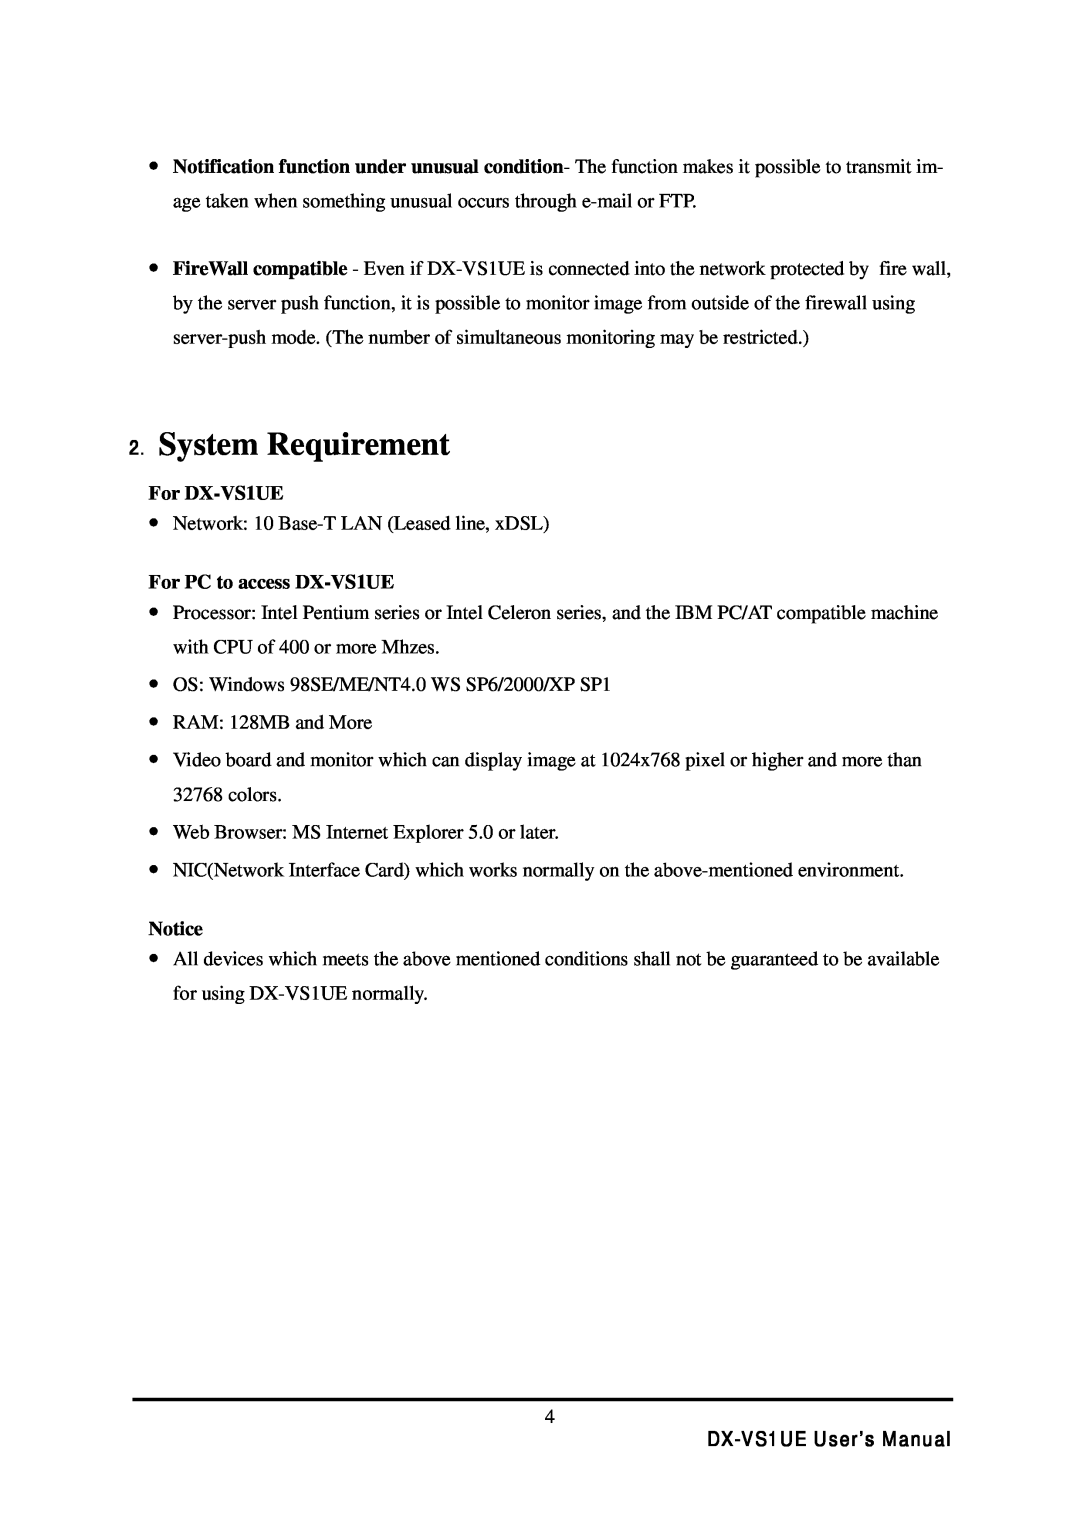 Mitsubishi Electronics user manual System Requirement, For DX-VS1UE, For PC to access DX-VS1UE, DX-VS1UE User’s Manual 